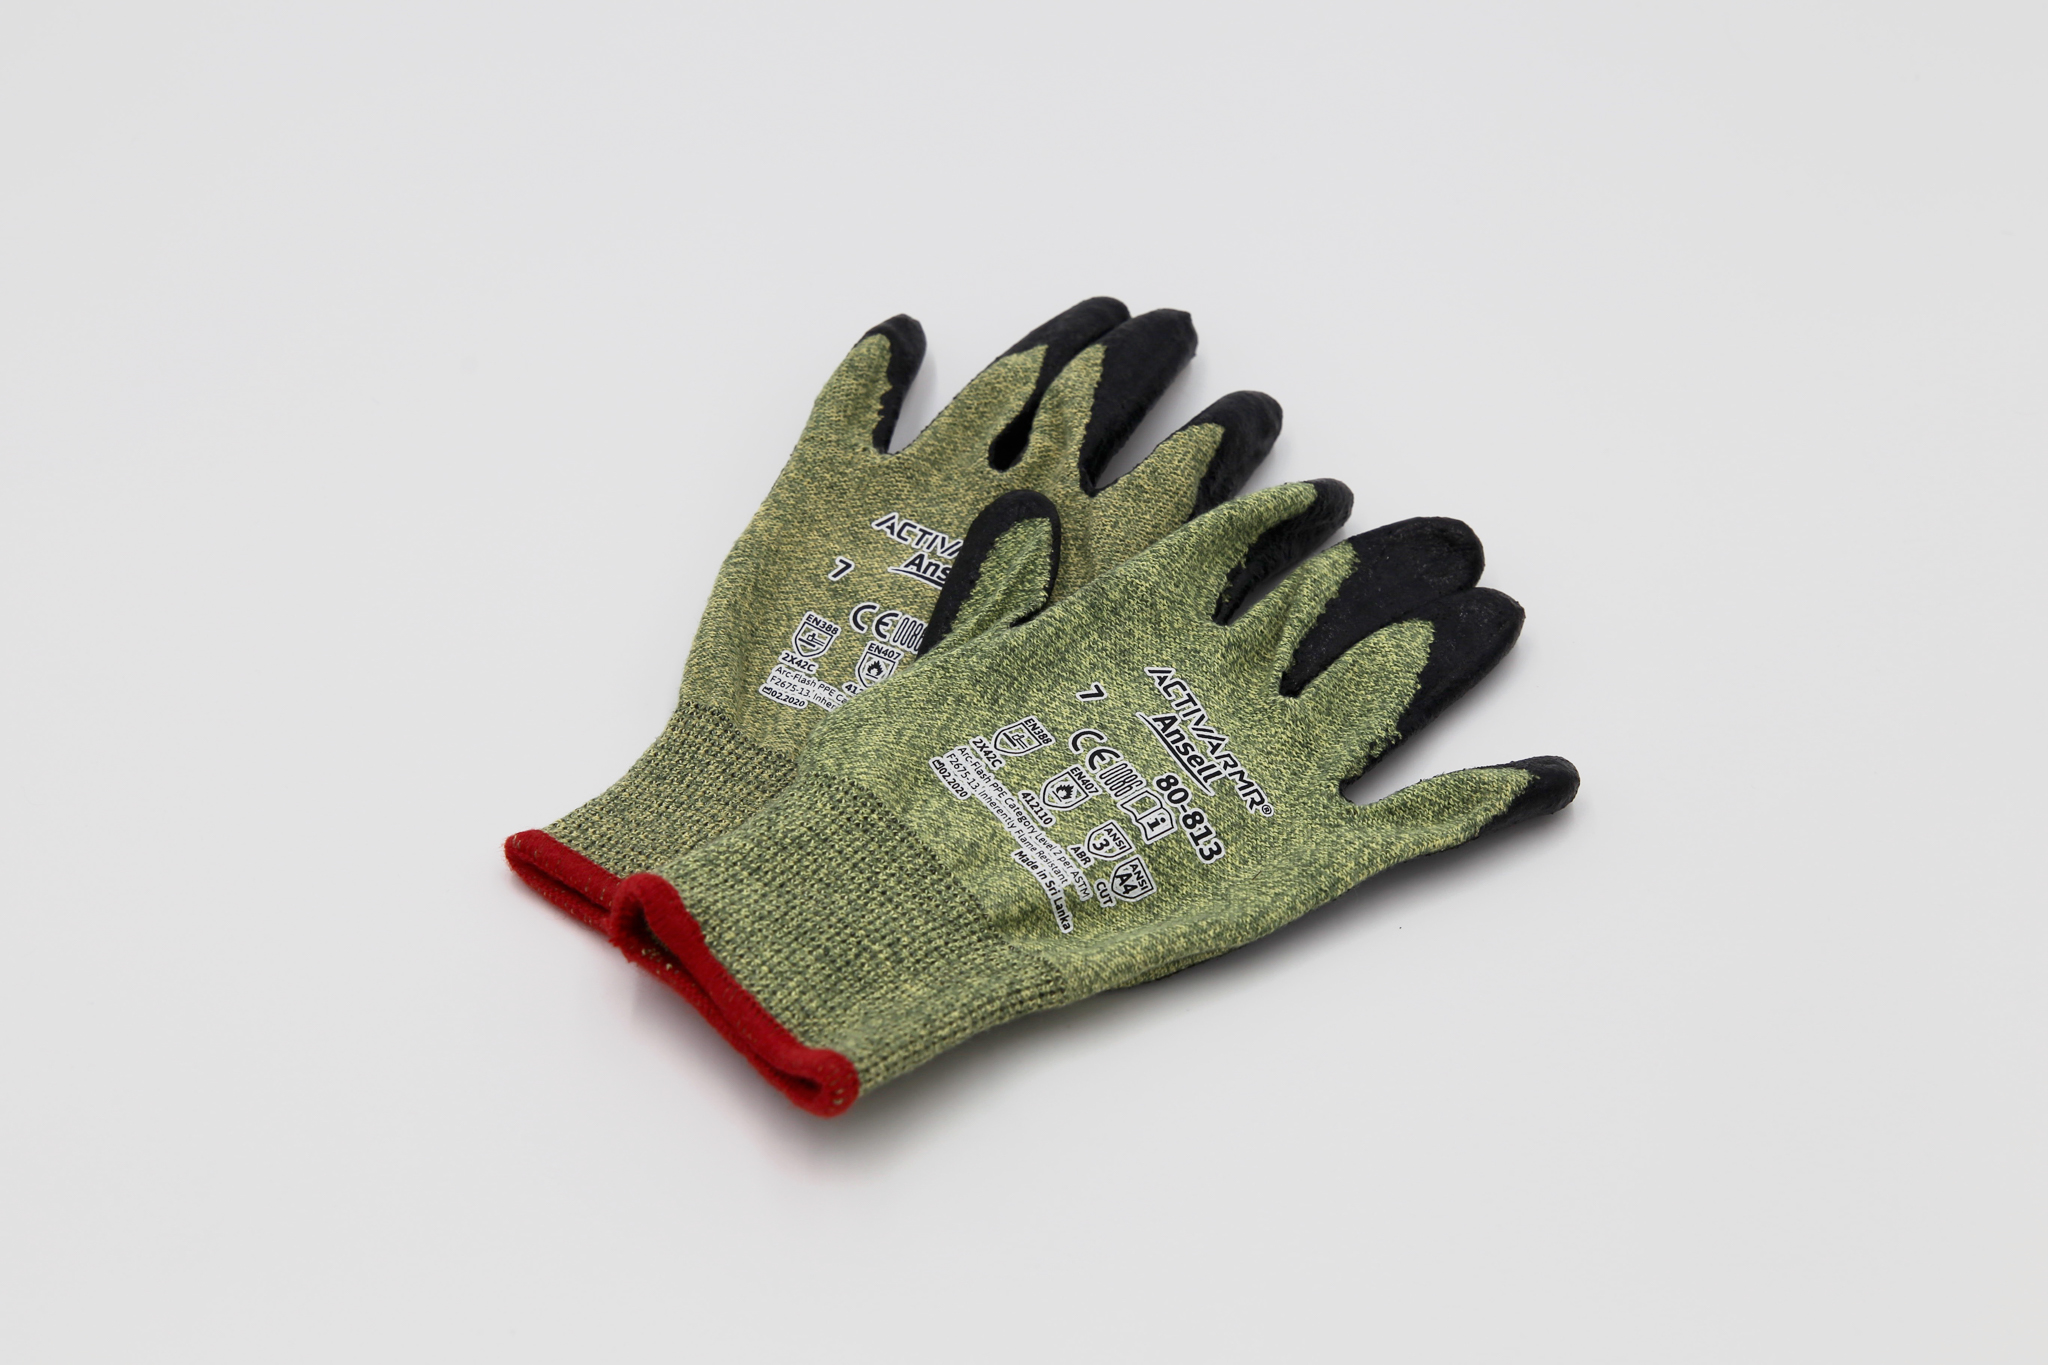 green cut resistant gloves on white background